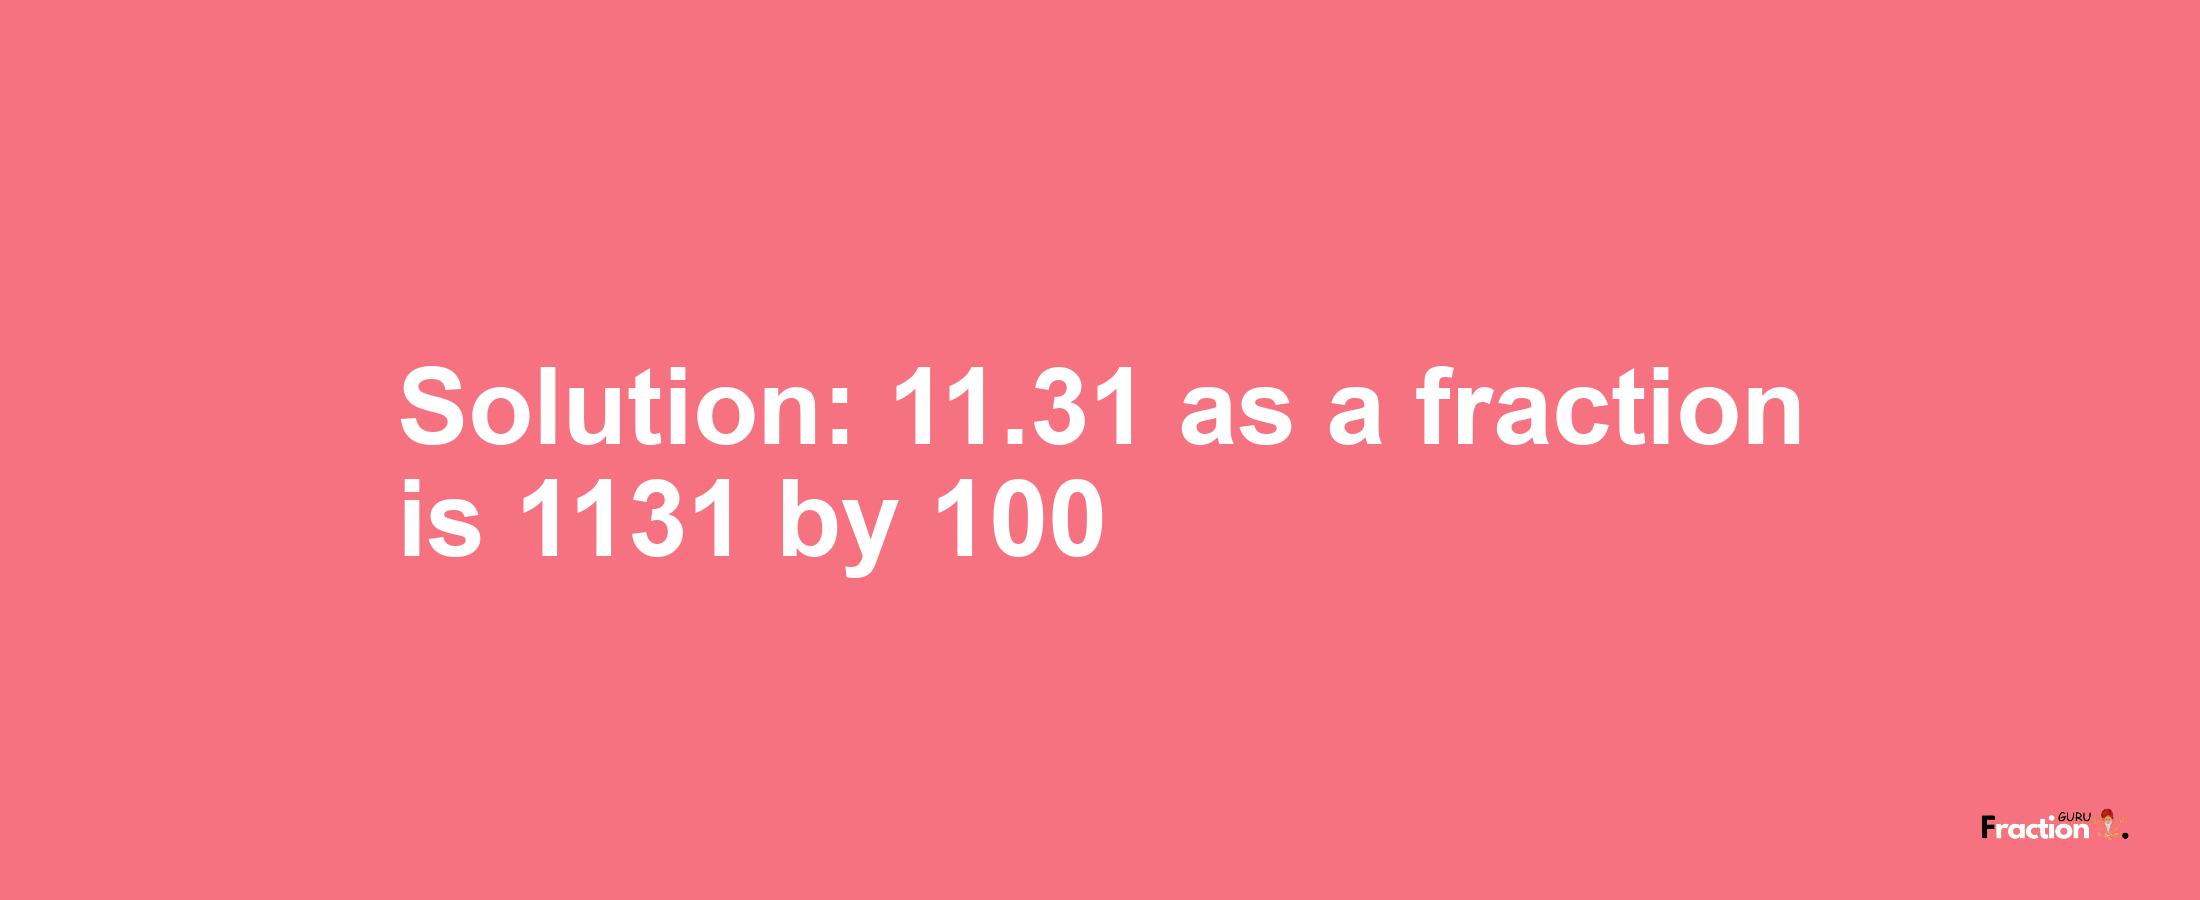 Solution:11.31 as a fraction is 1131/100